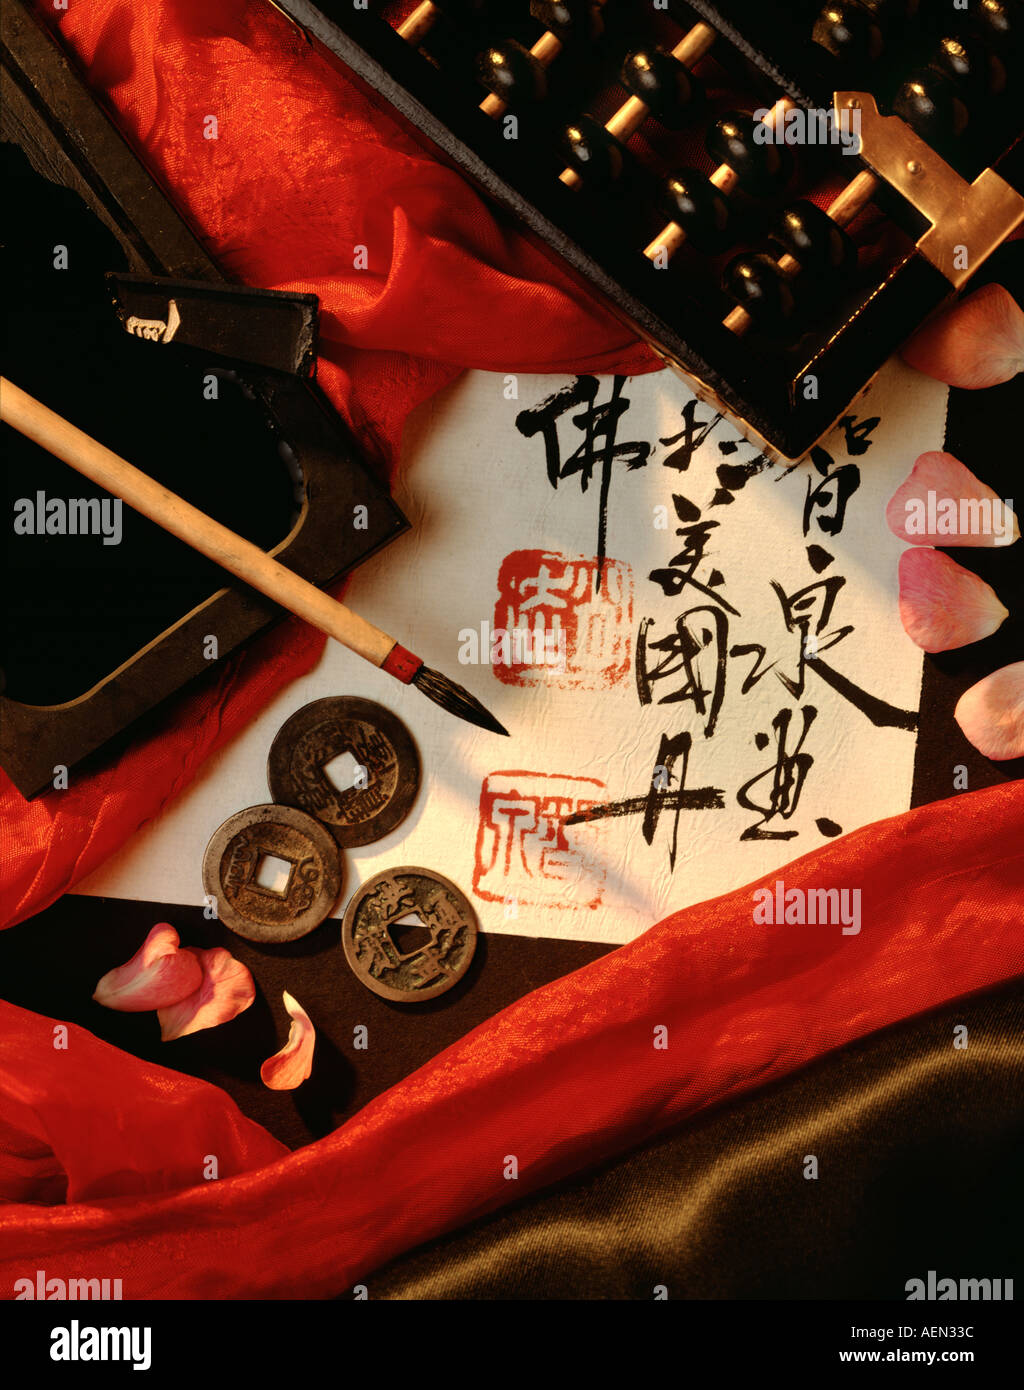 Still Life of Chinese coins avec la calligraphie Banque D'Images